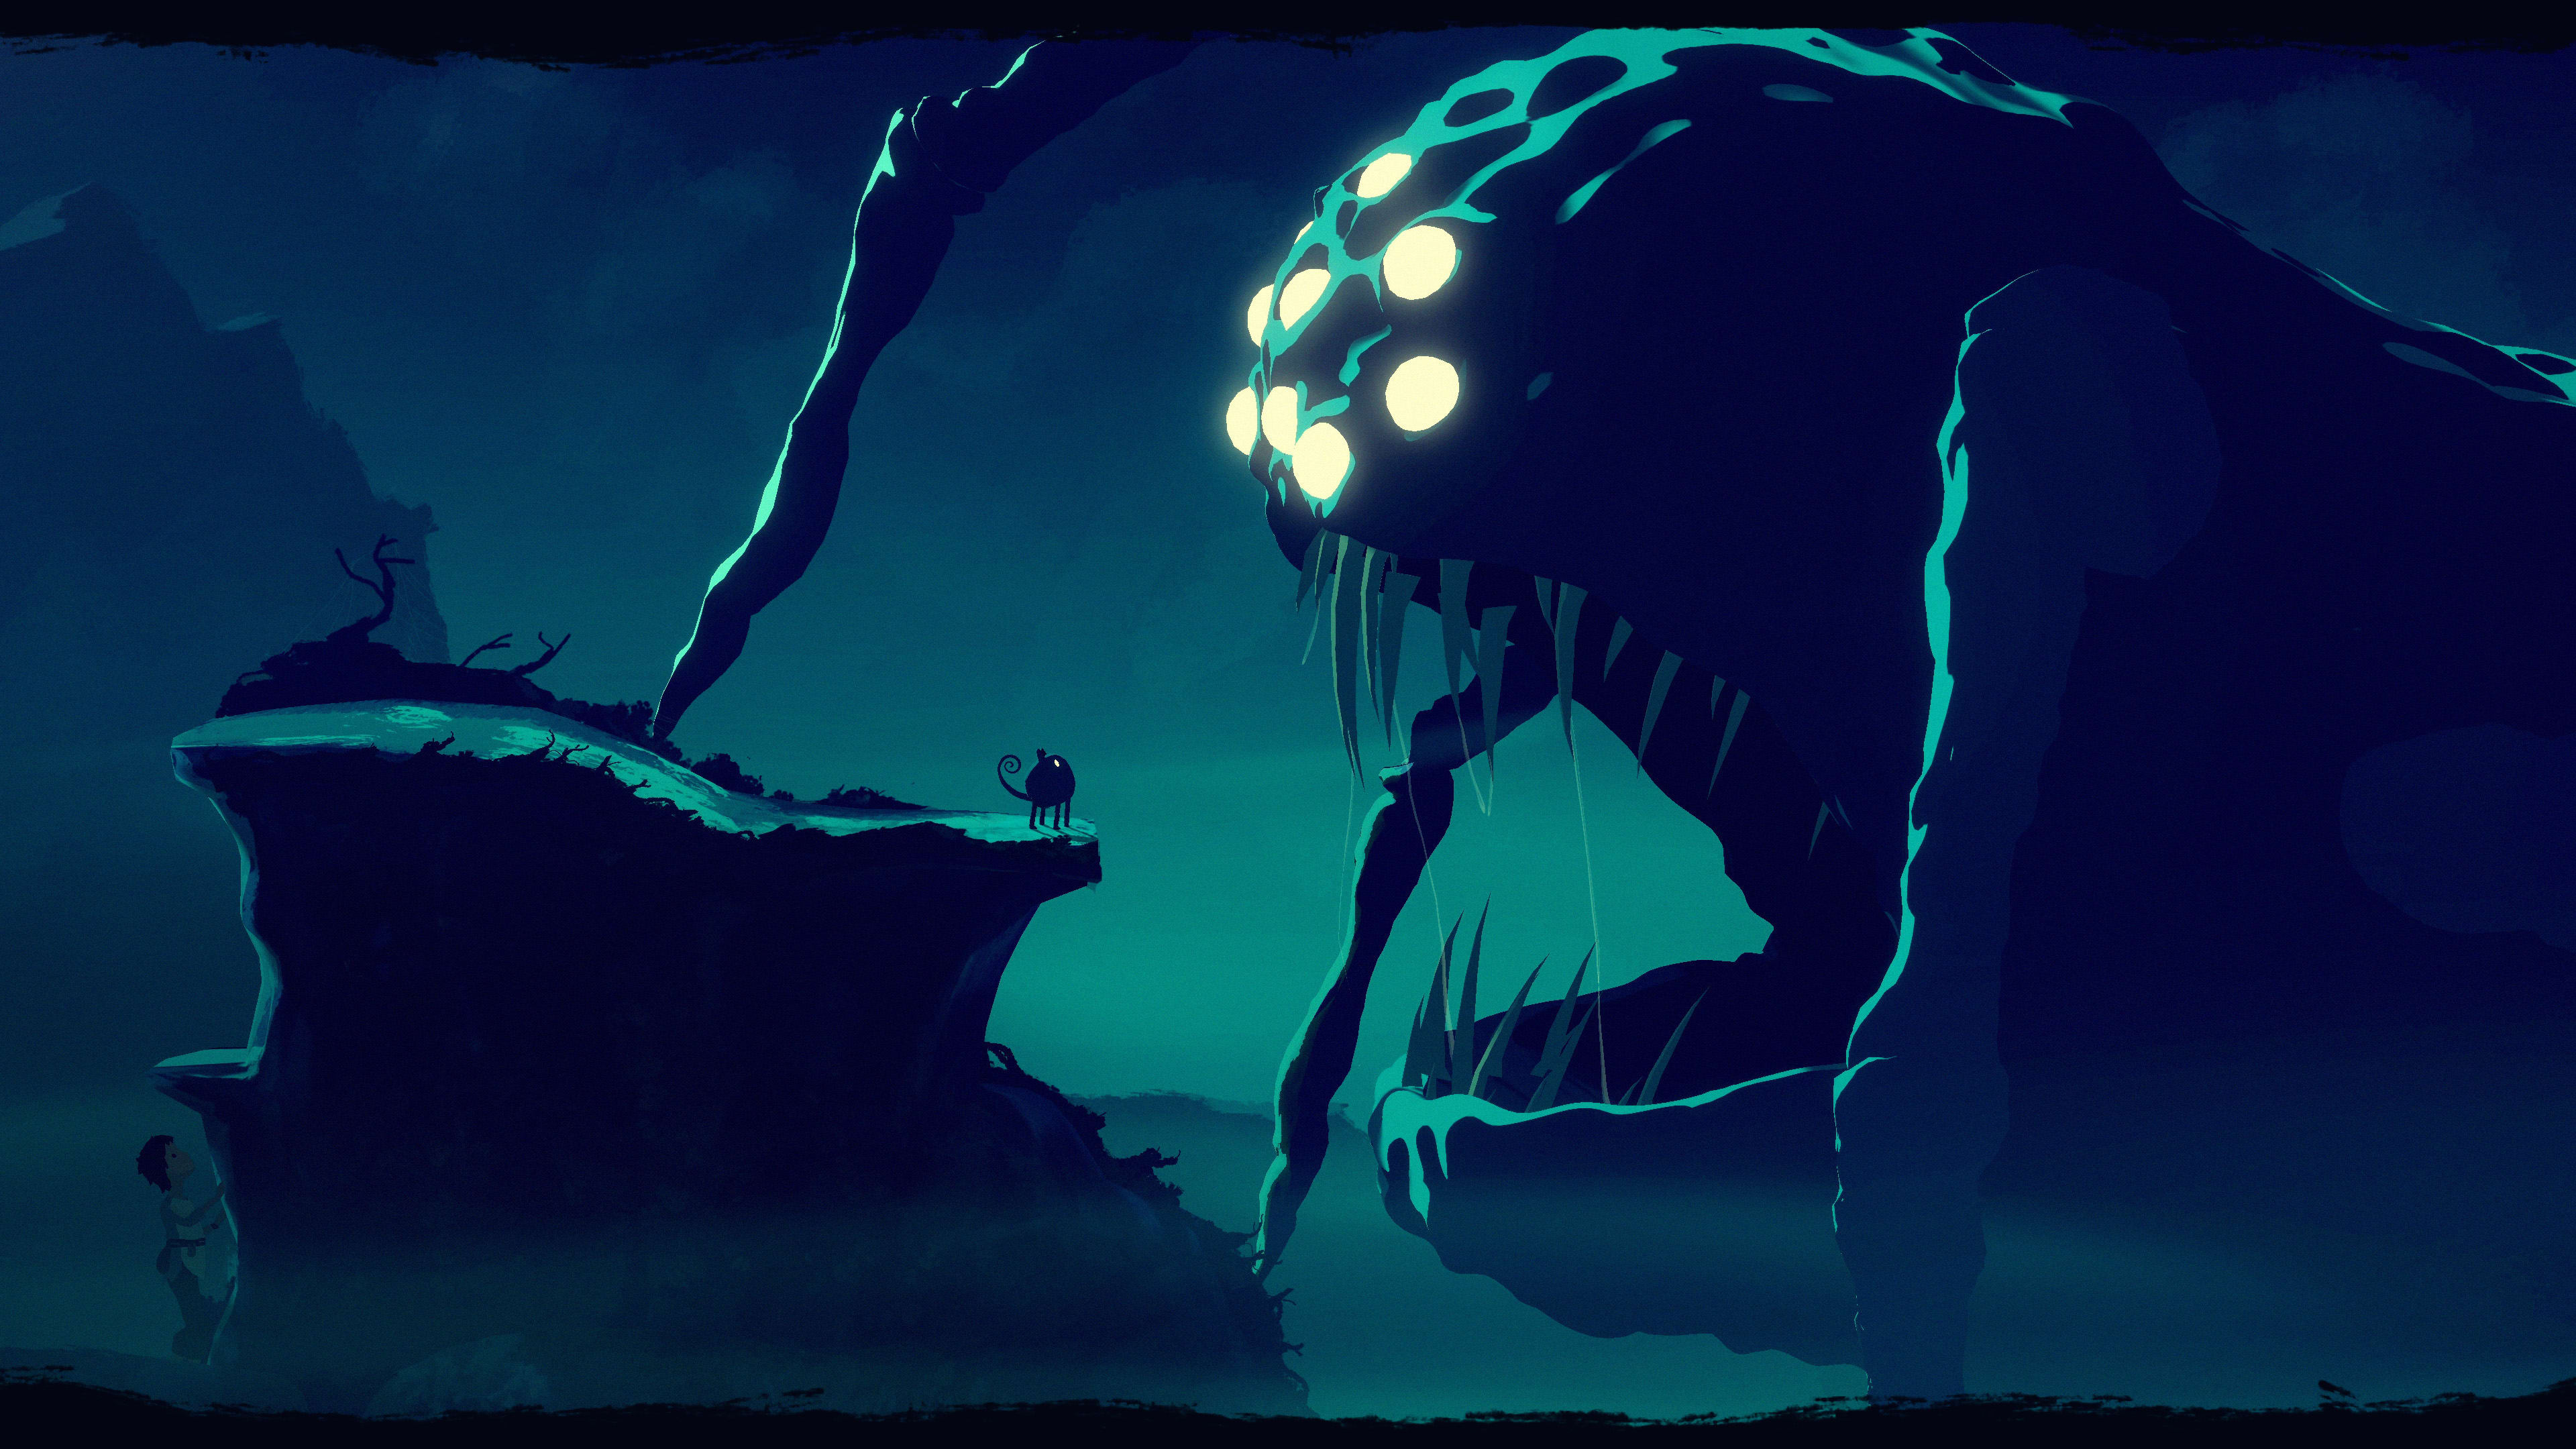 Image for Planet of Lana is a lovely cinematic puzzle adventure game from Wishfully Studios